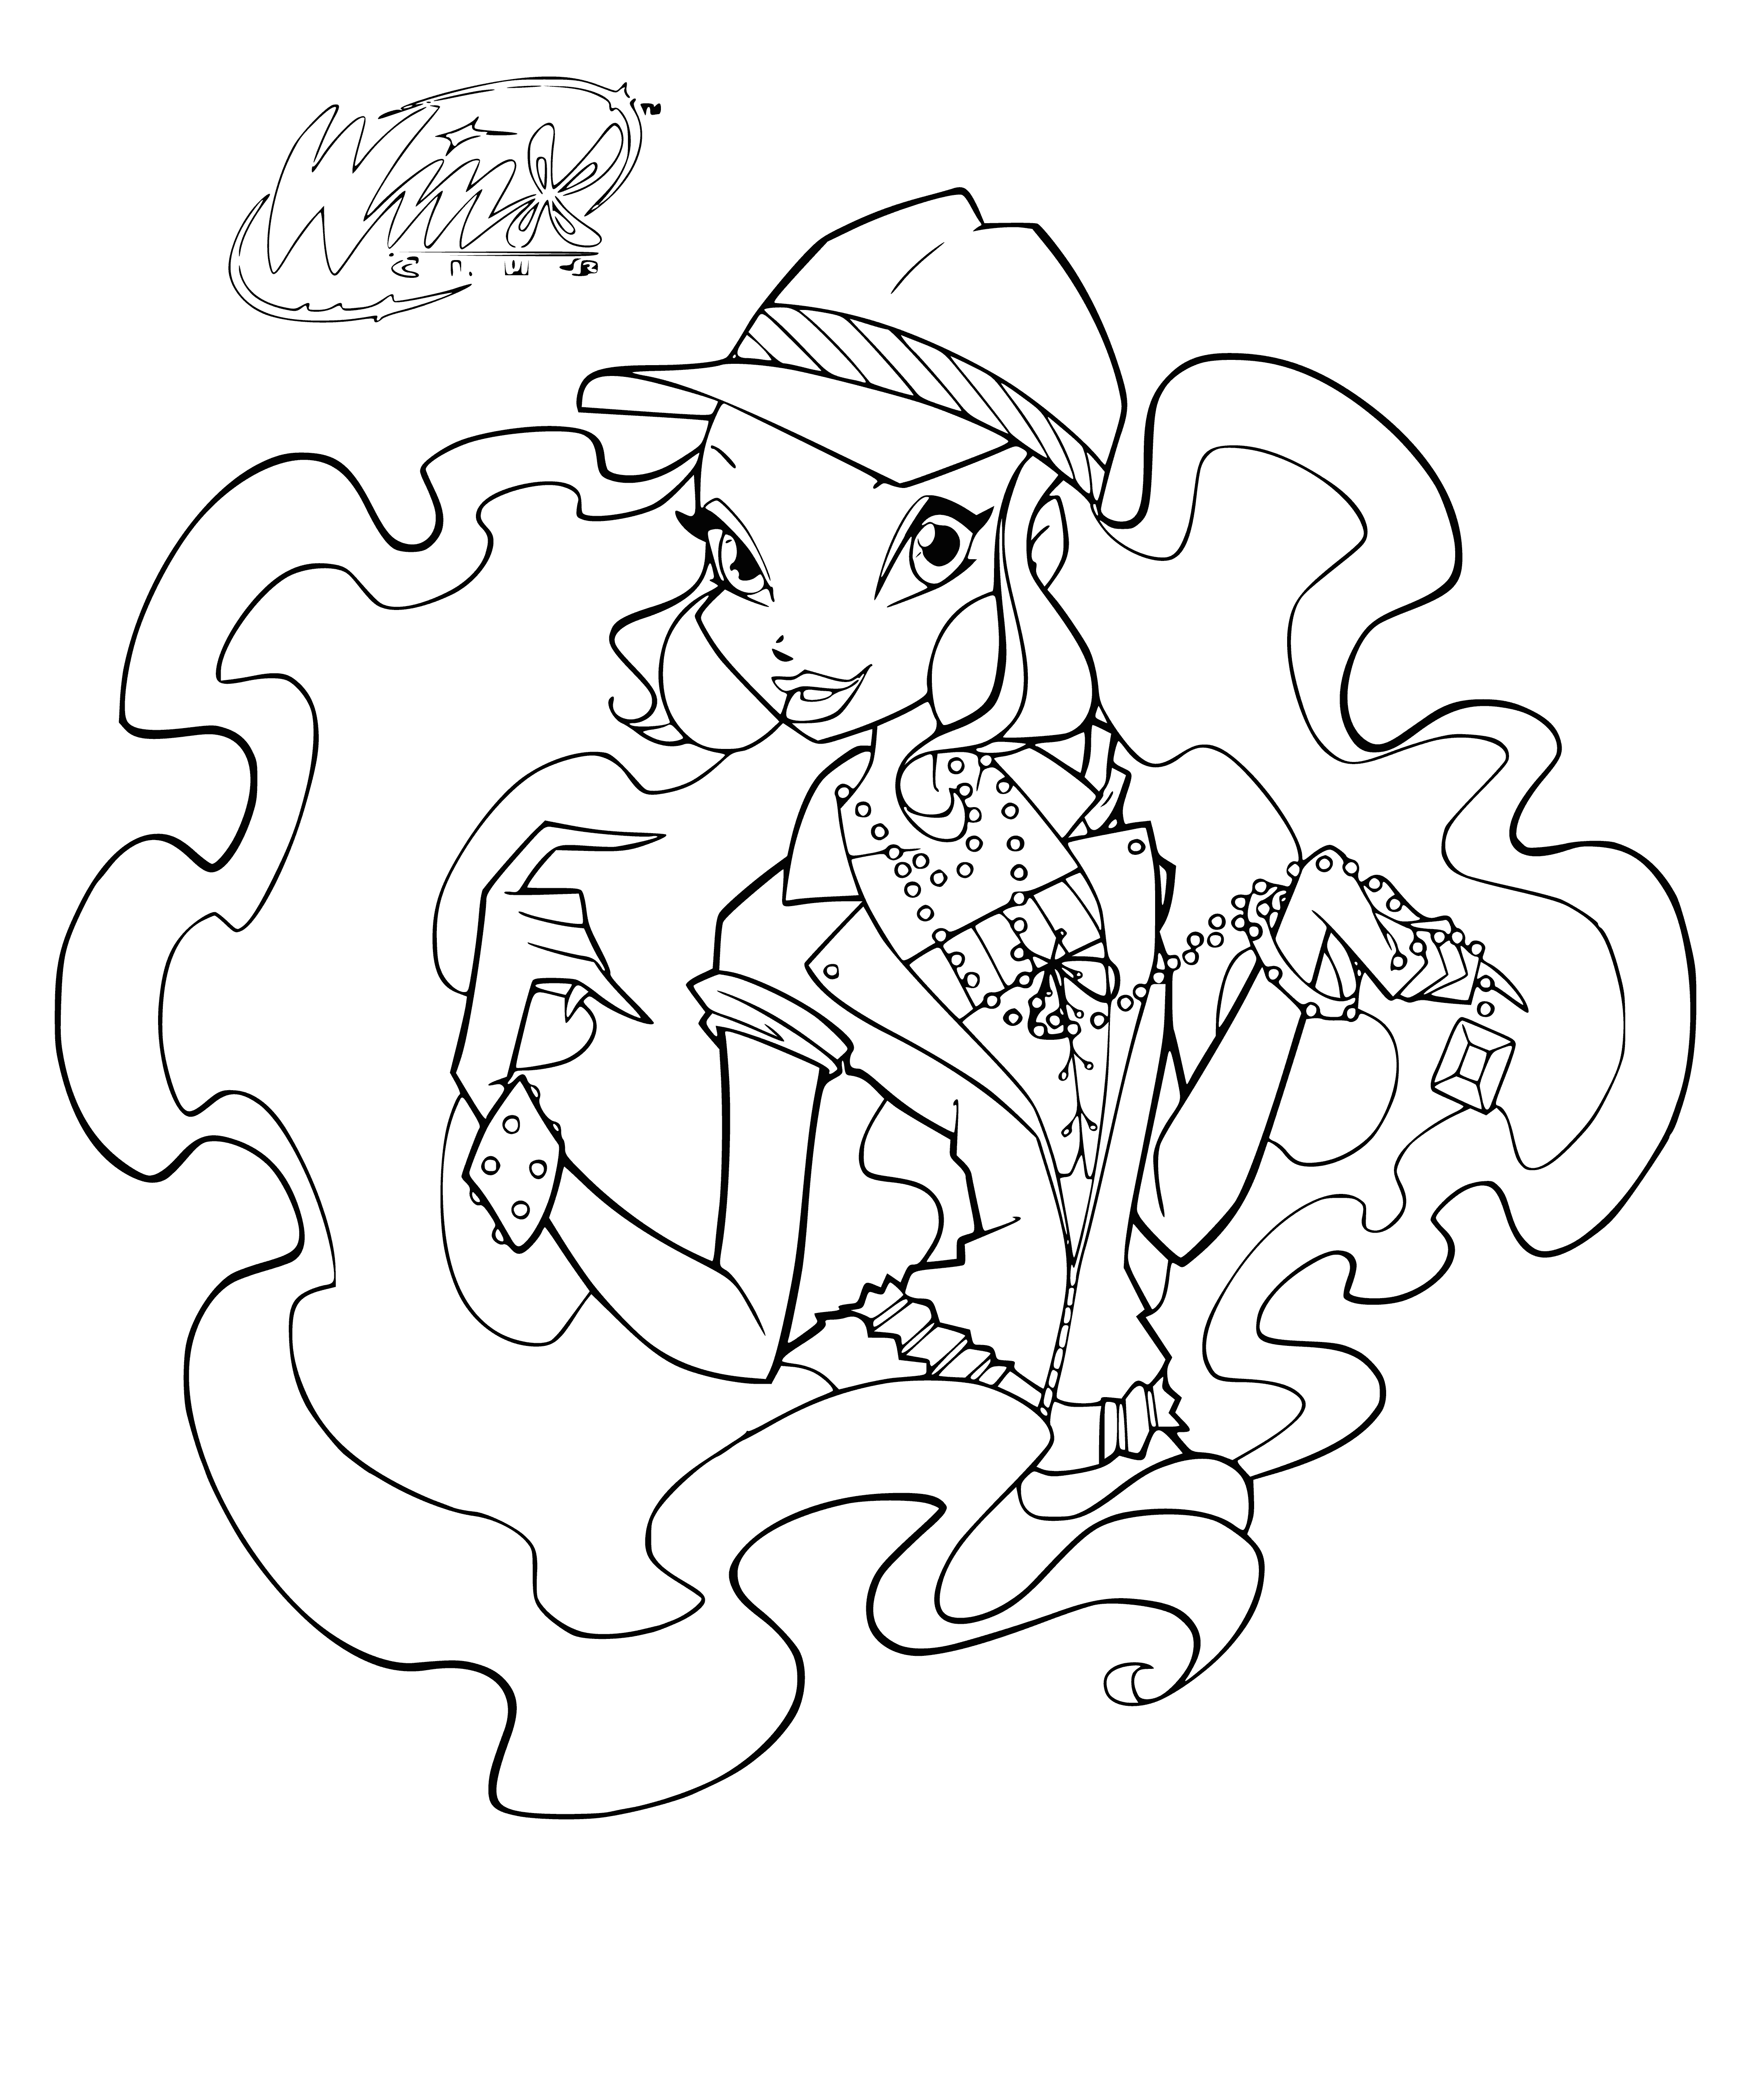 Leila poses in a colorful dress and fashionable updo, sporting necklace & bracelet. #coloringpage